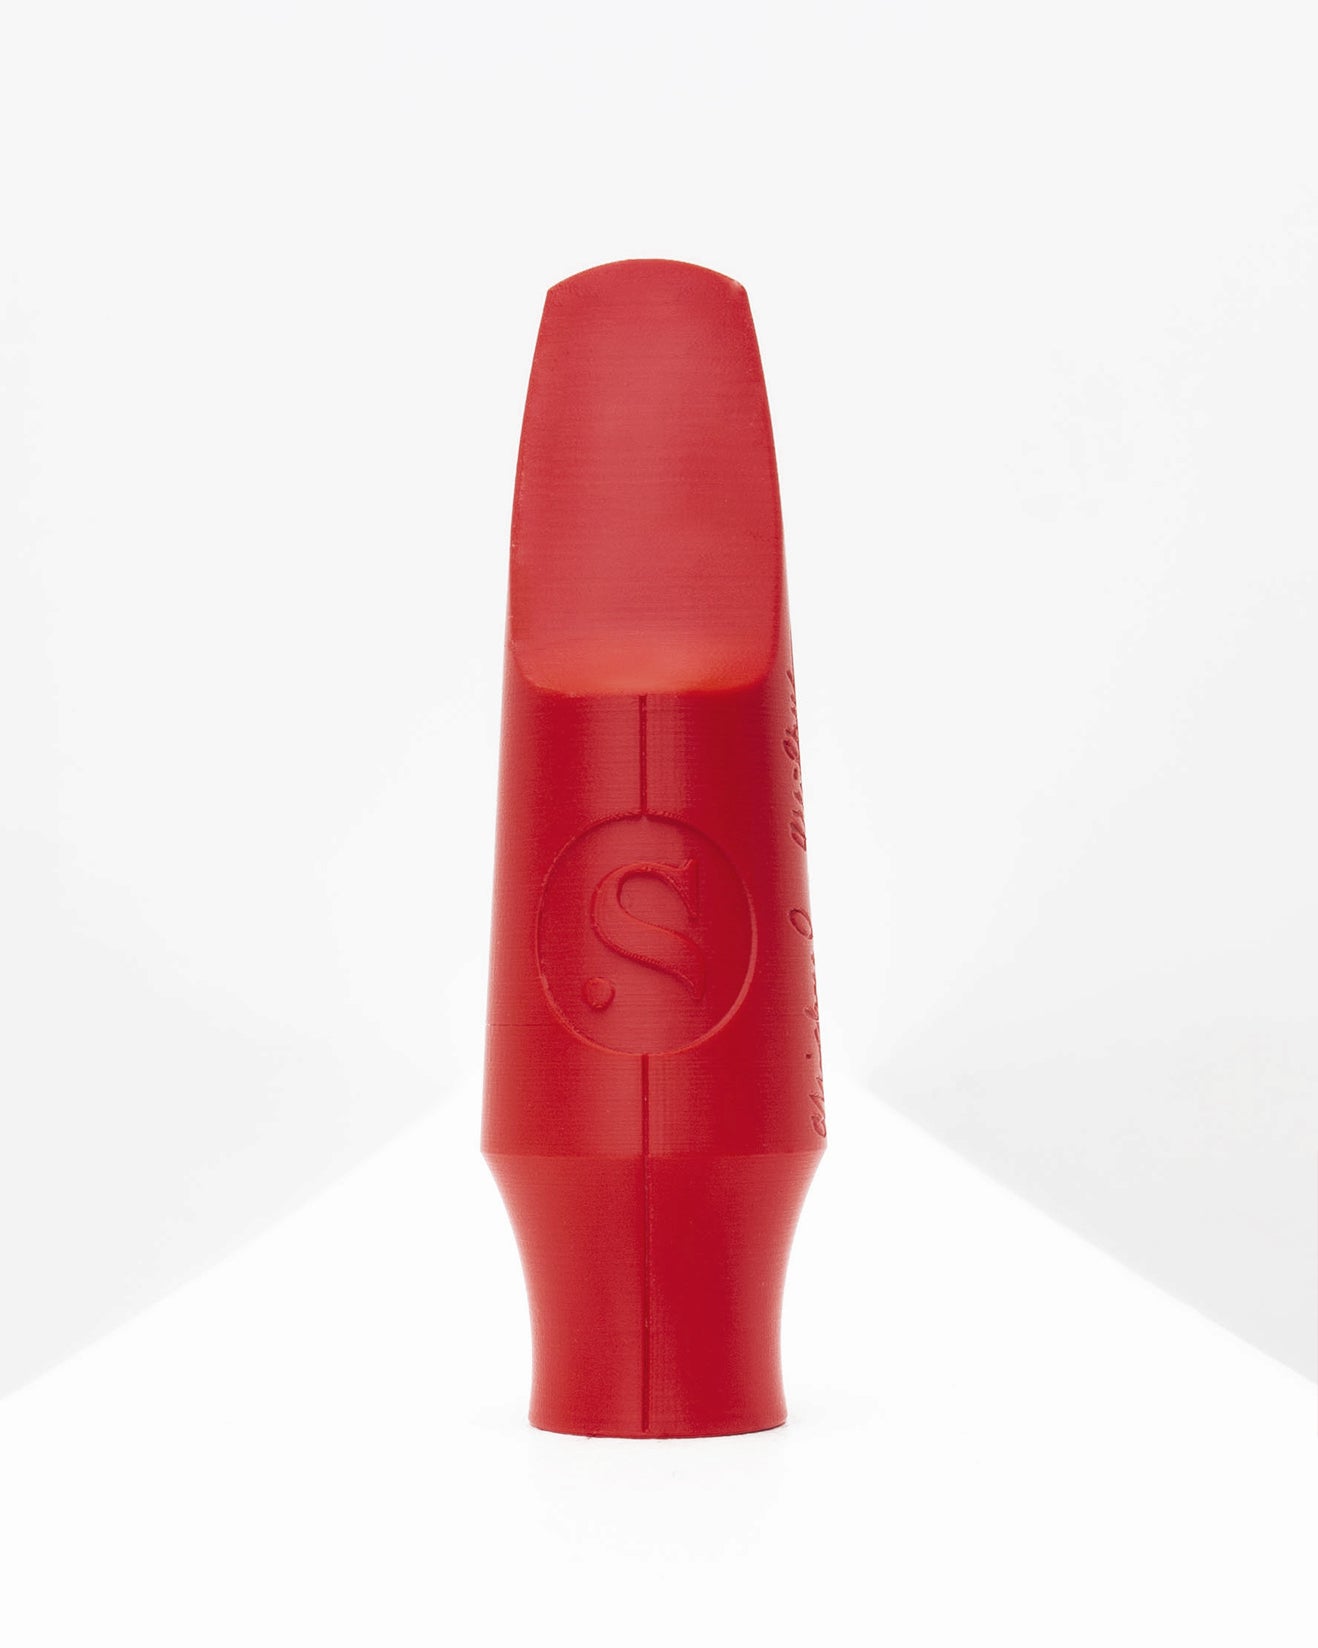 Tenor Signature Saxophone mouthpiece - Dan Forshaw by Syos - 9 / Carmine Red